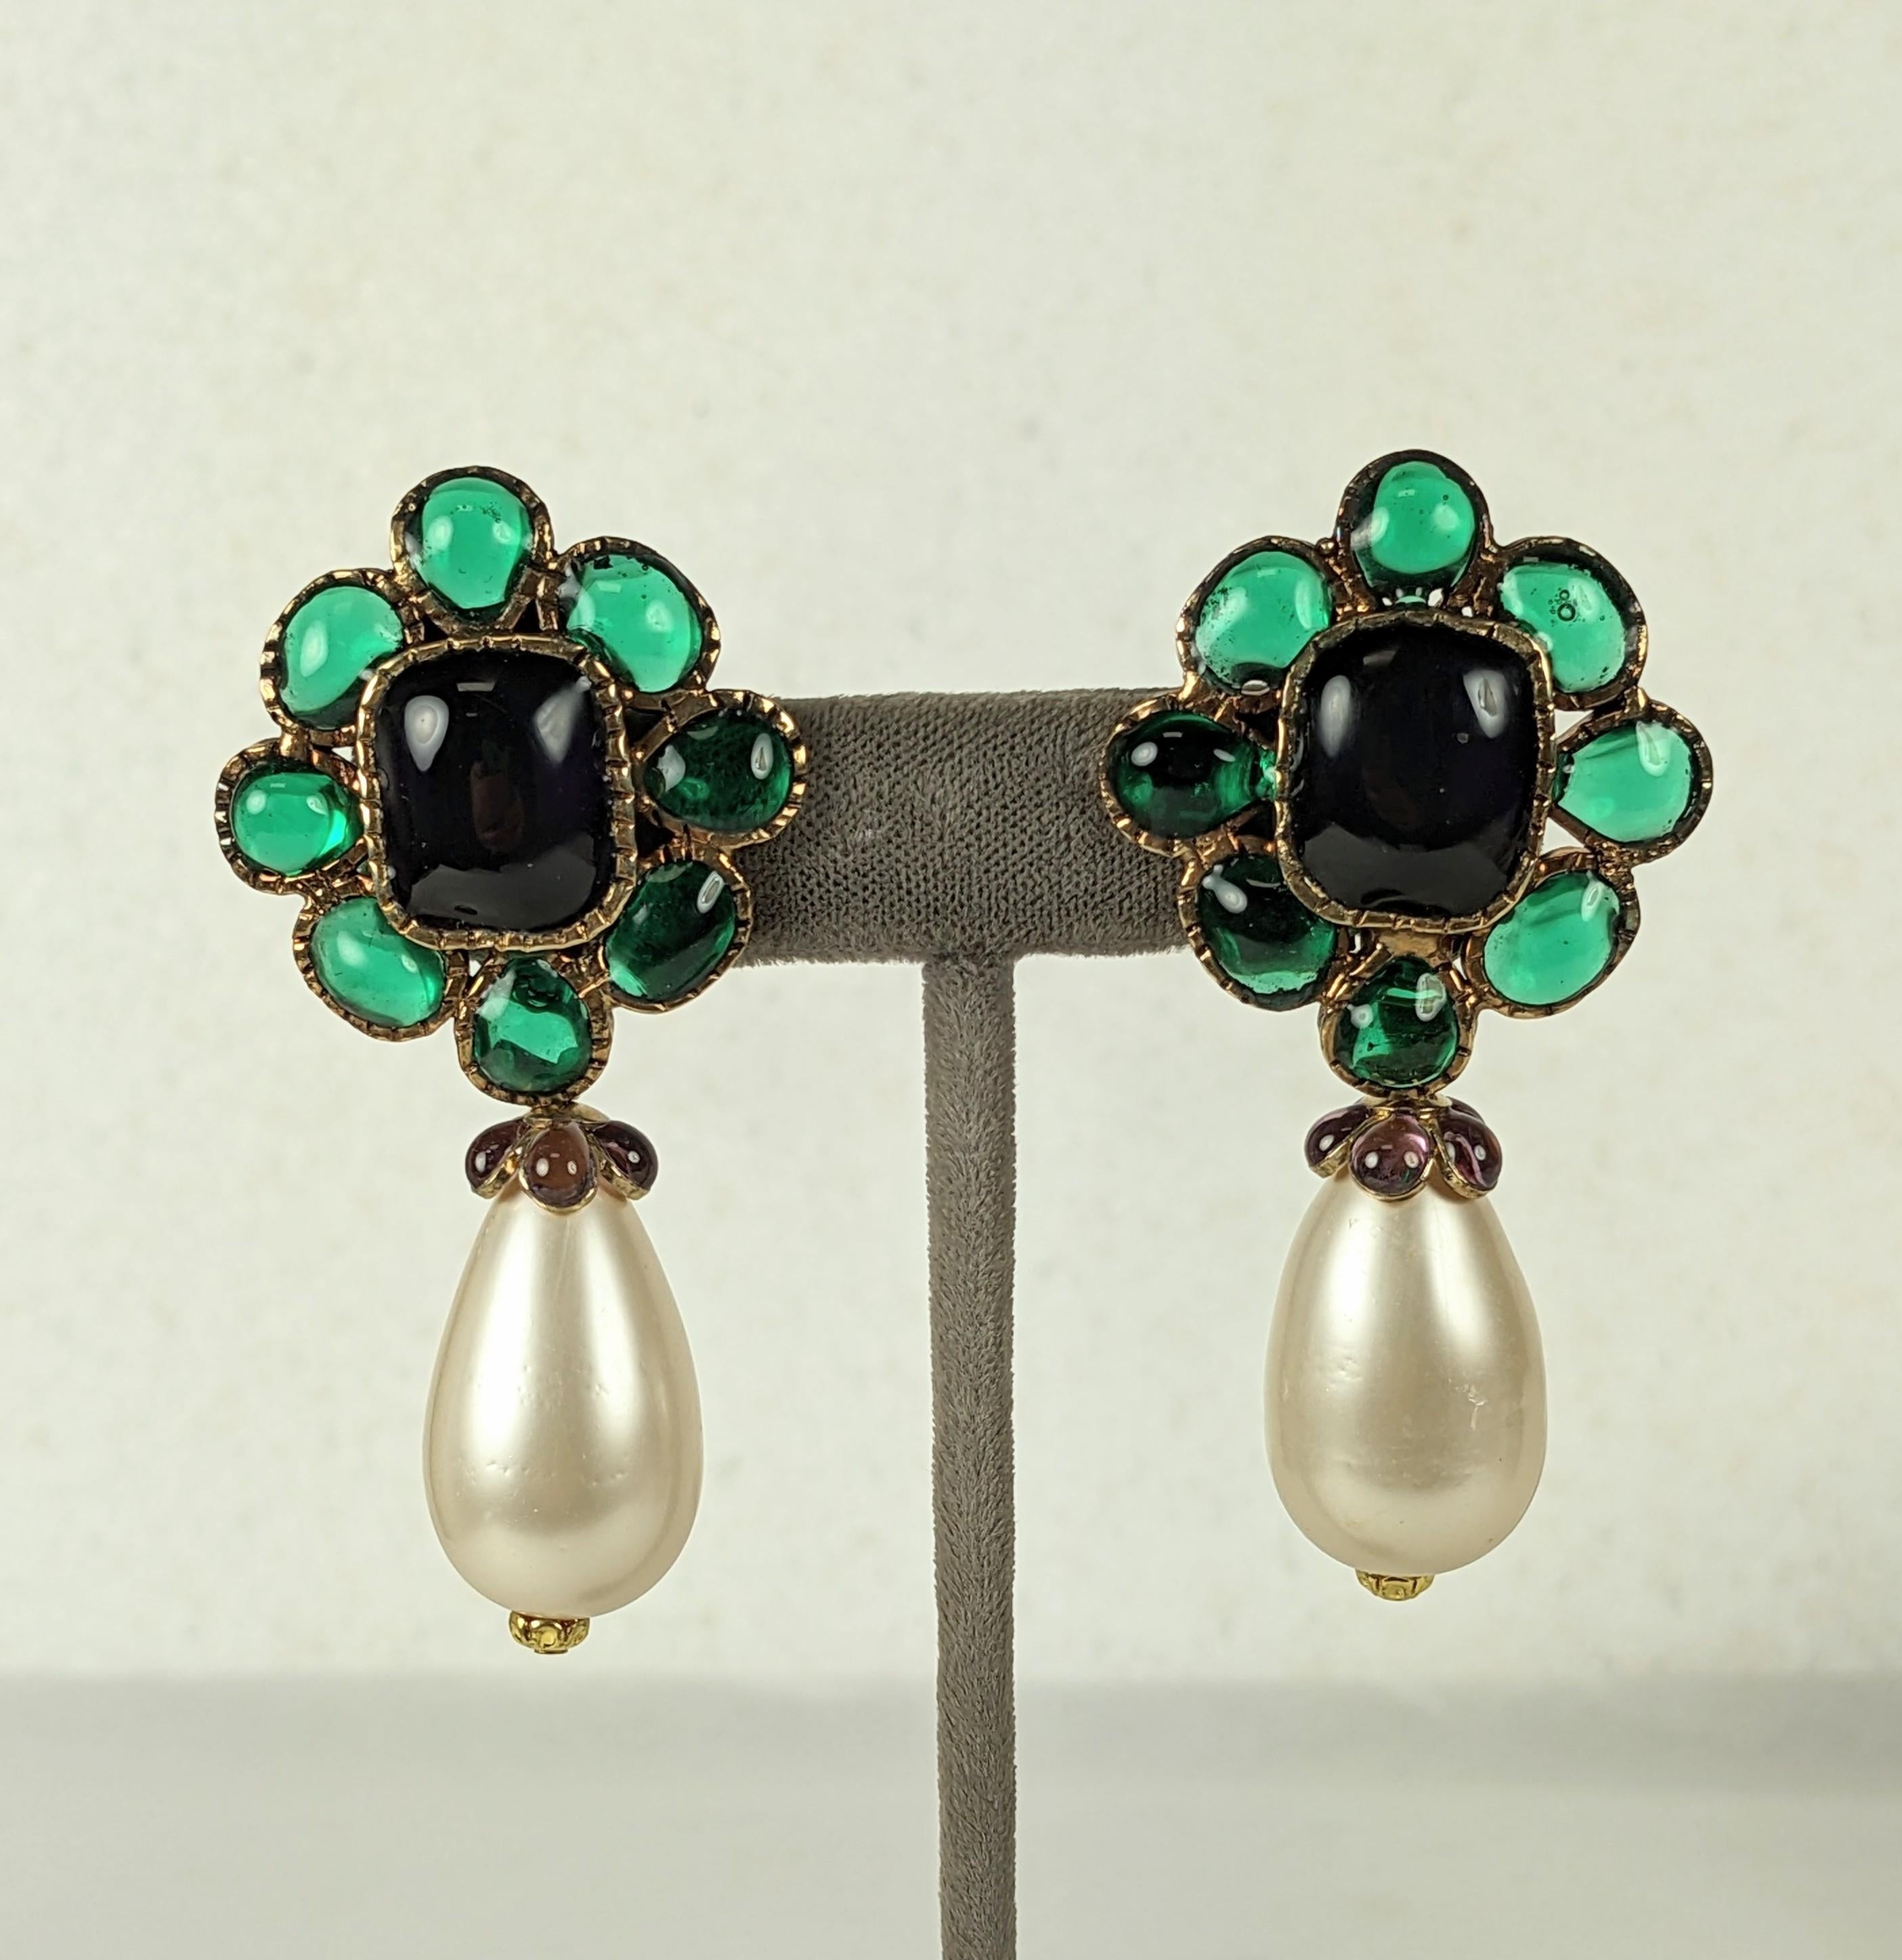 Lovely Chanel Moghul Pearl Drop Earrings from the 1980's by Maison Gripoix. Poured glass construction in amythest and emerald with large faux pearl drops, each with a poured glass amythest cap. Made in the hand poured glass process no longer used by